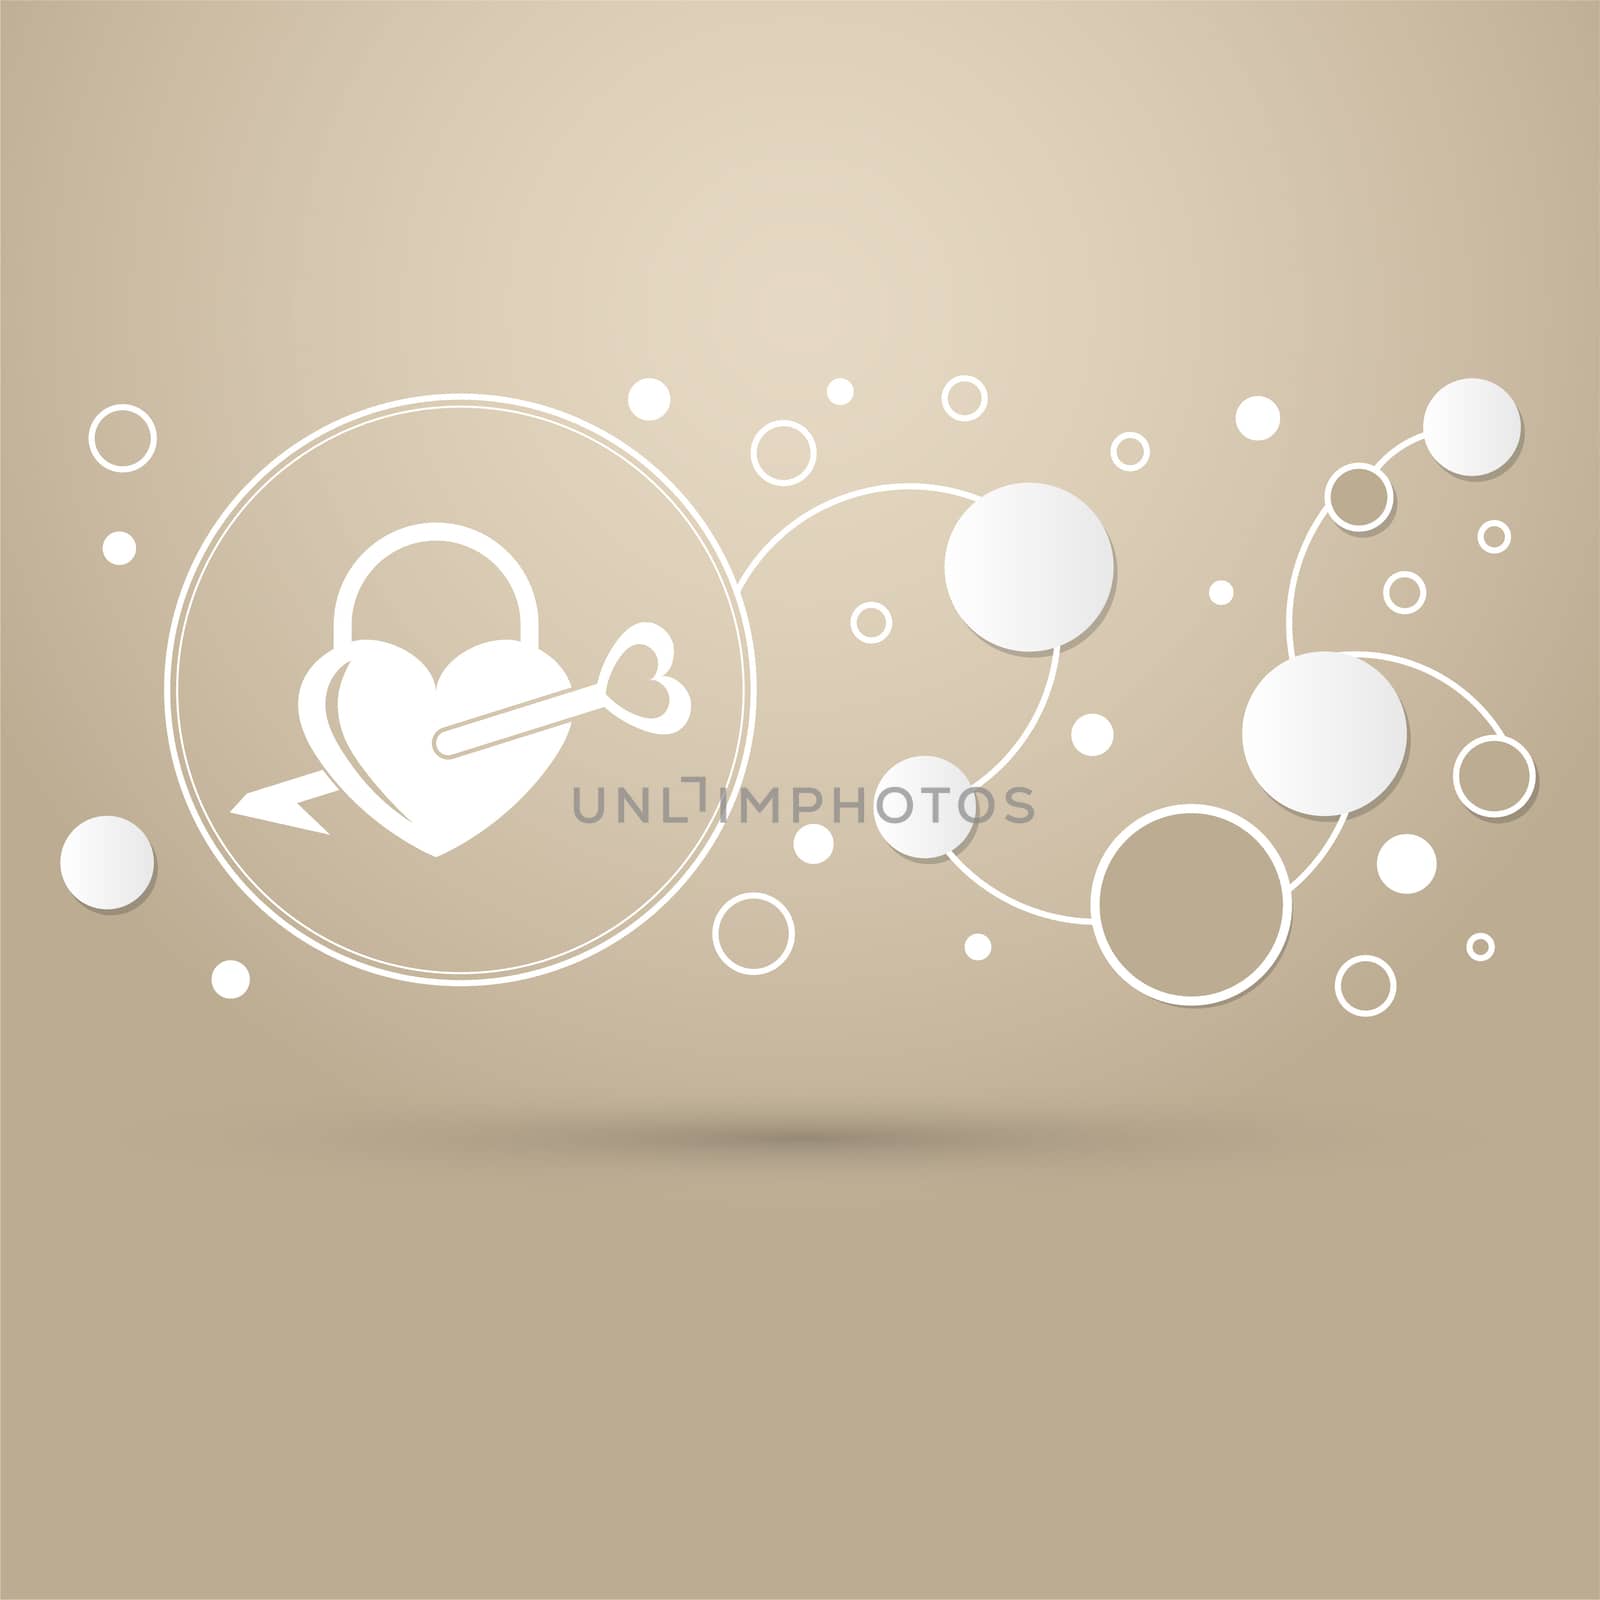 lock icons. A simple silhouette of the lock for the door. Shape of a heart. on a brown background with elegant style and modern design infographic. illustration